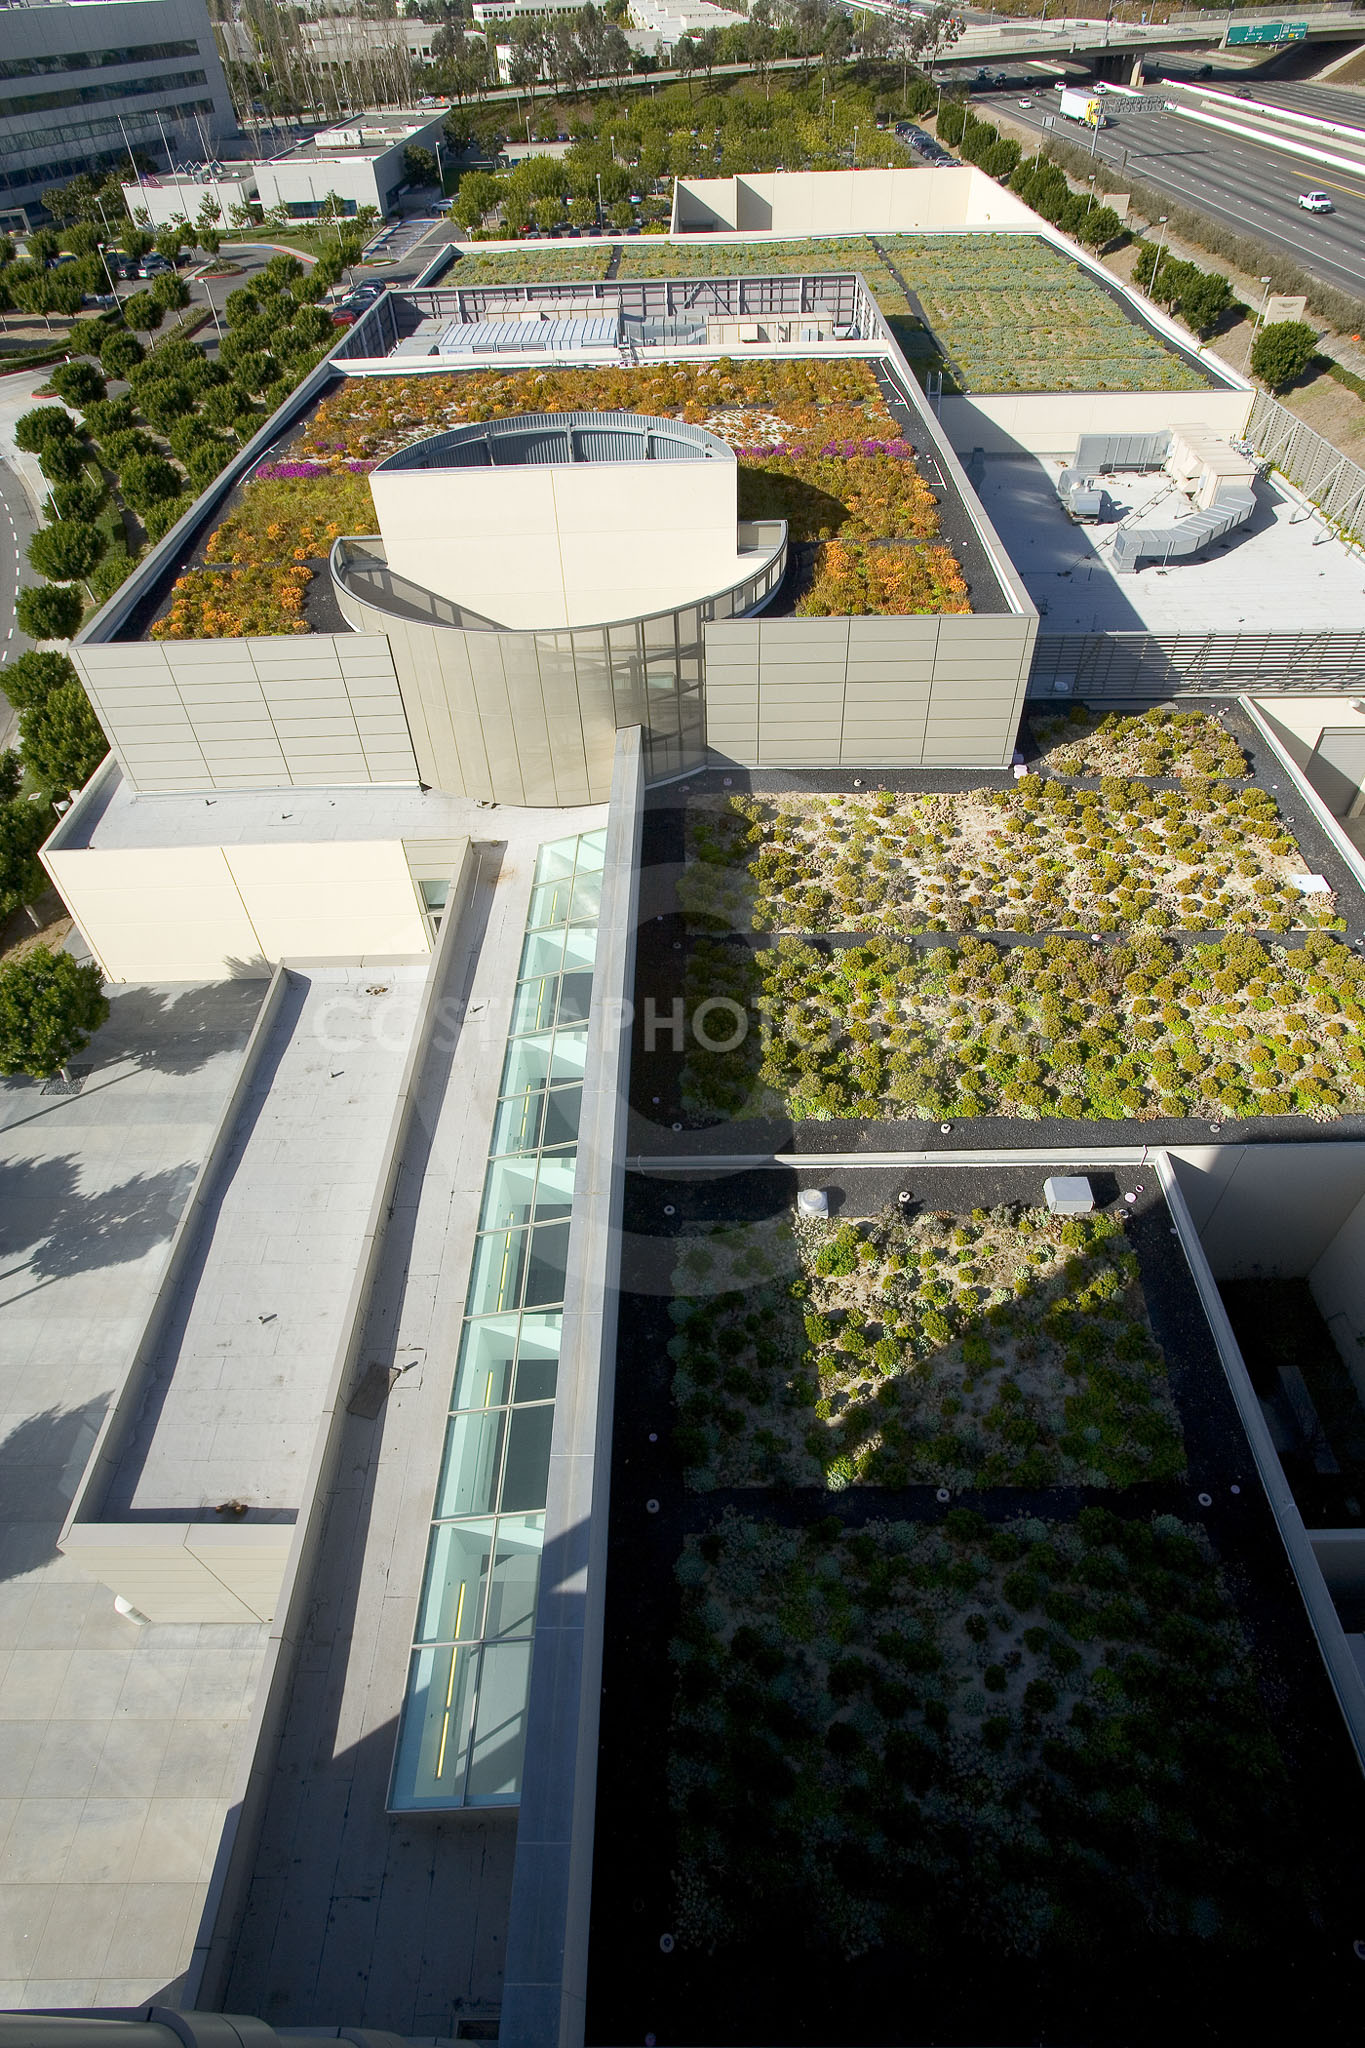 PAG Green Roof 001